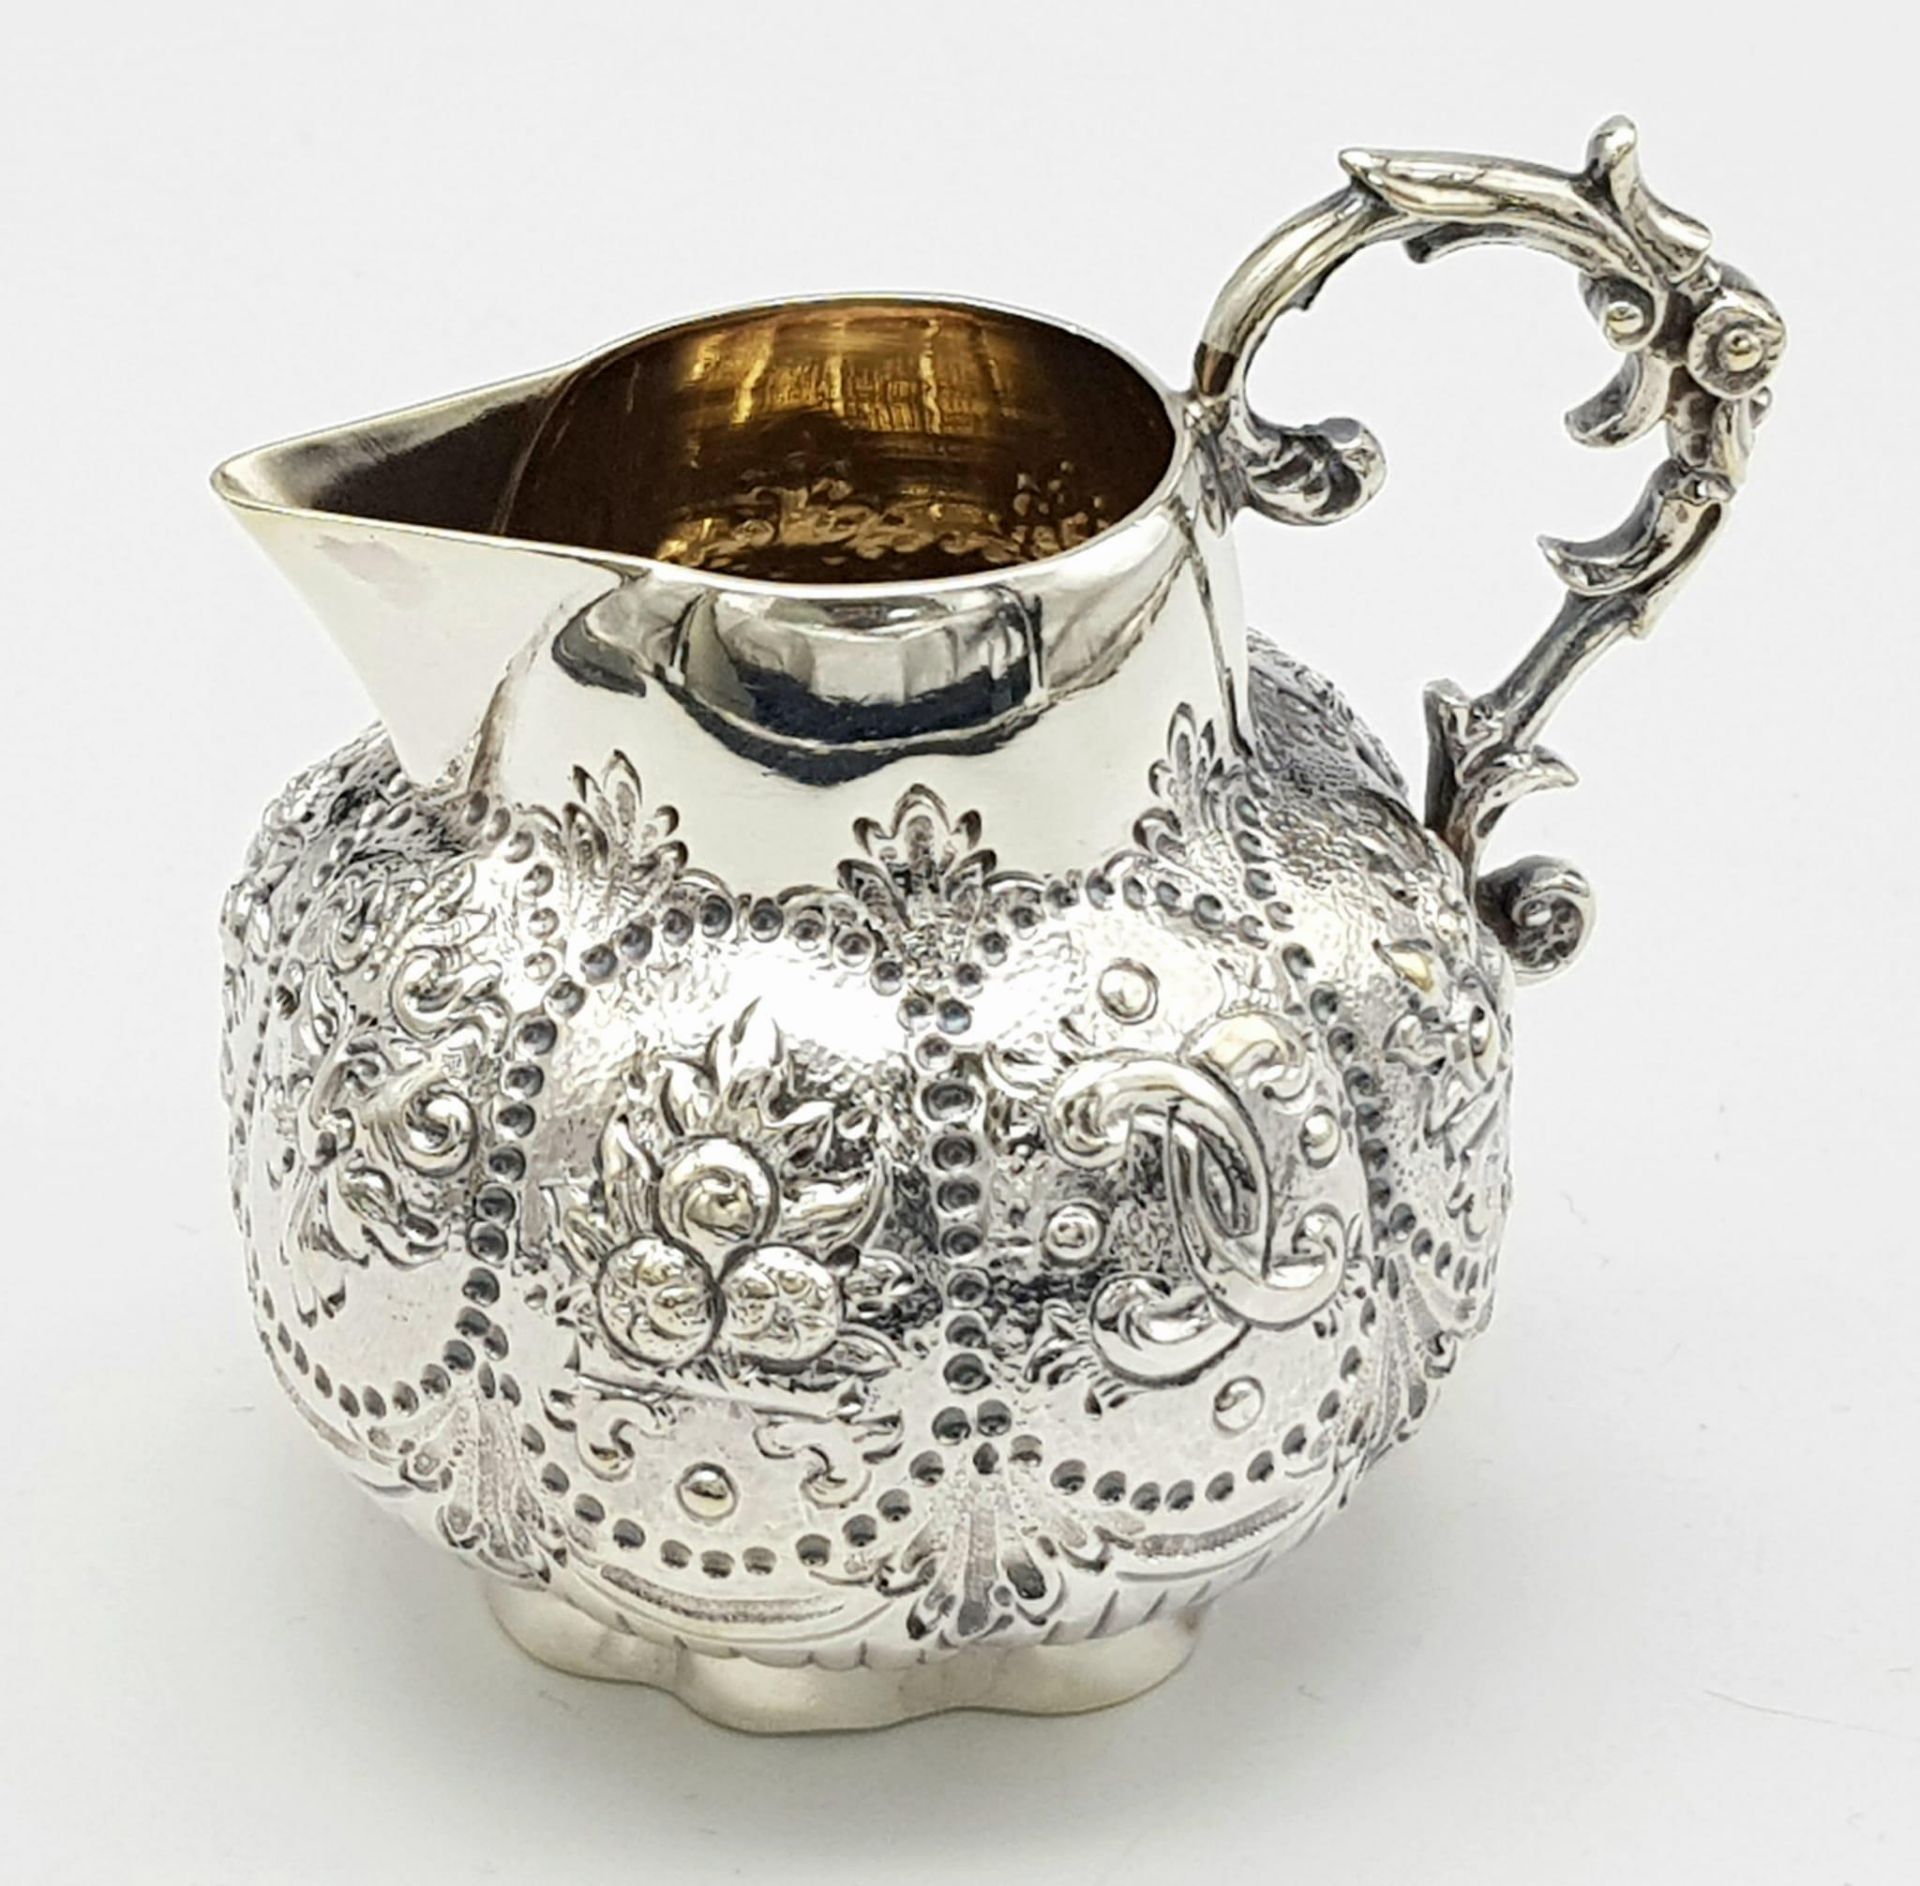 A SMALL SOLID SILVER JUG WITH THE INSCRIPTION "XMAS 1899" ALTHOUGH THE HALLMARK IS DATED 1891 WITH